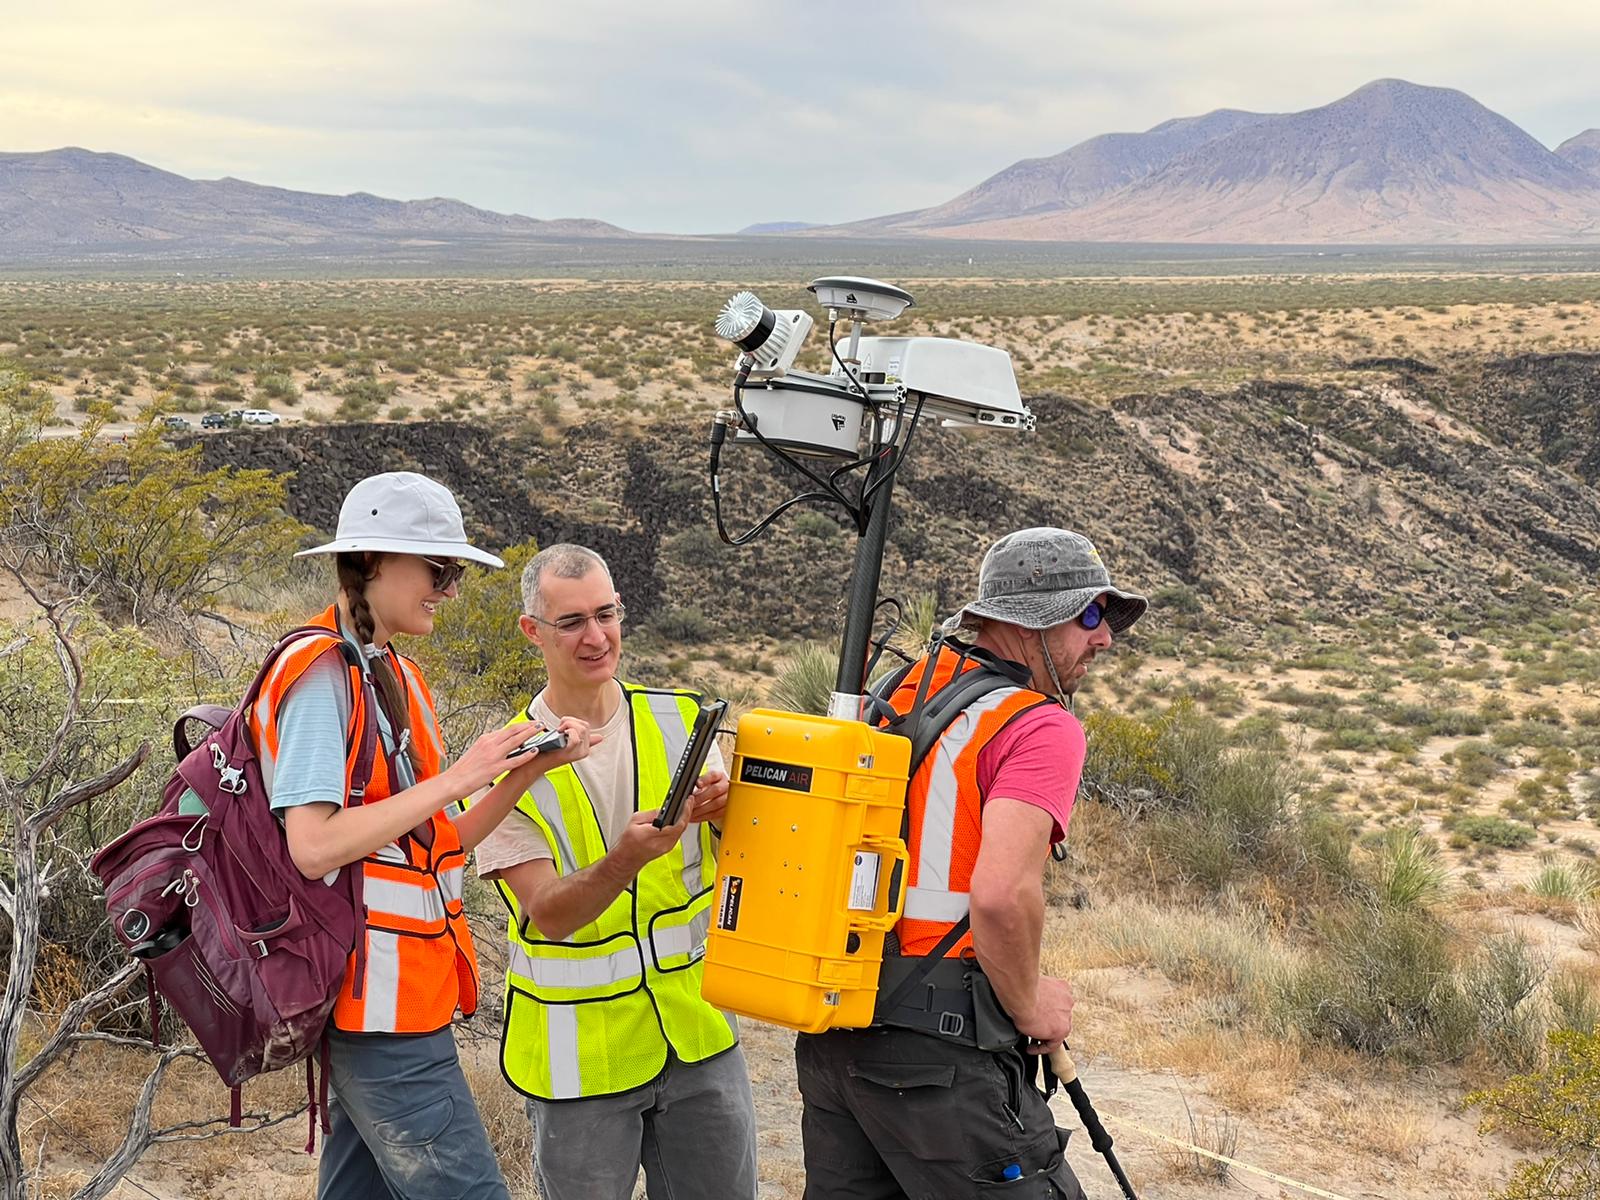 Researchers attach a lidar unit to another's back in the desert.